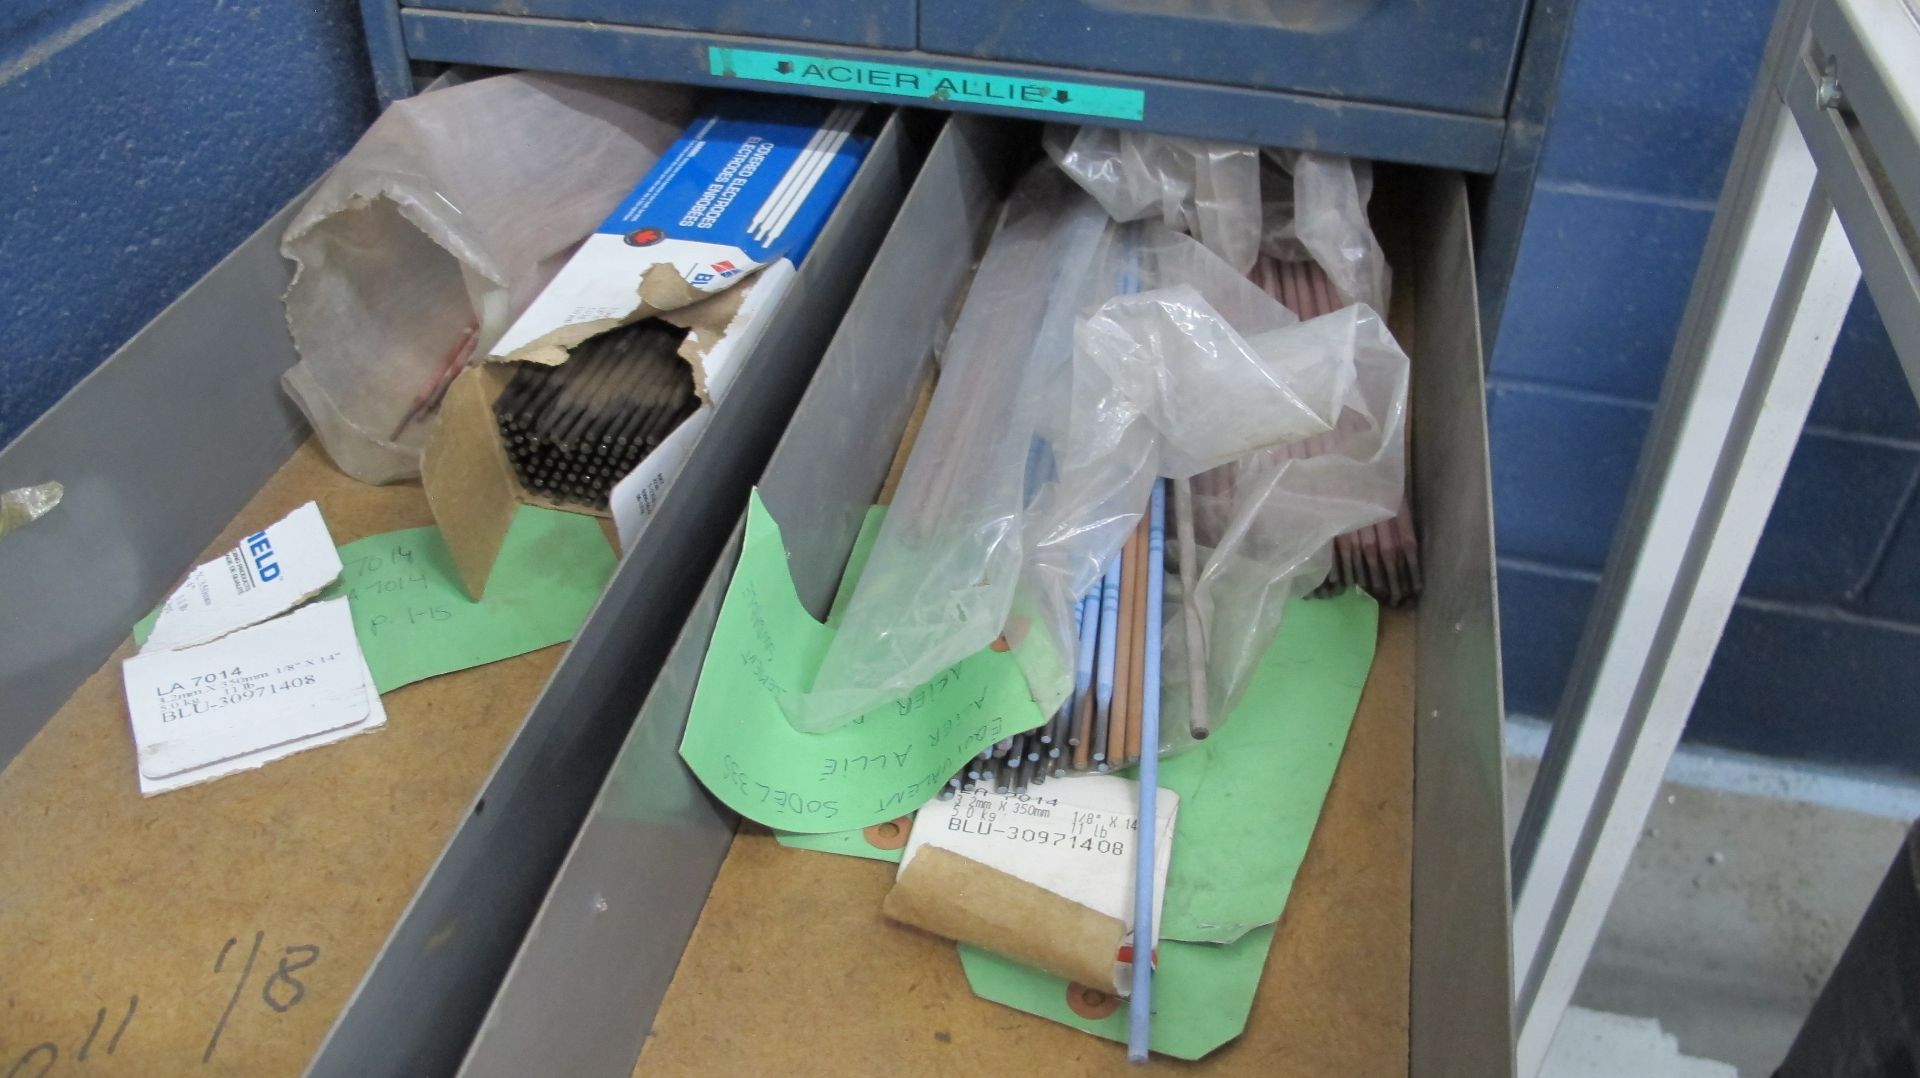 LOT OF WELDING ELECTRODES IN 10-LEVEL STORAGE CABINET AND WELDING SUPPLIES IN 2ND 10-LEVEL STORAGE - Image 5 of 14